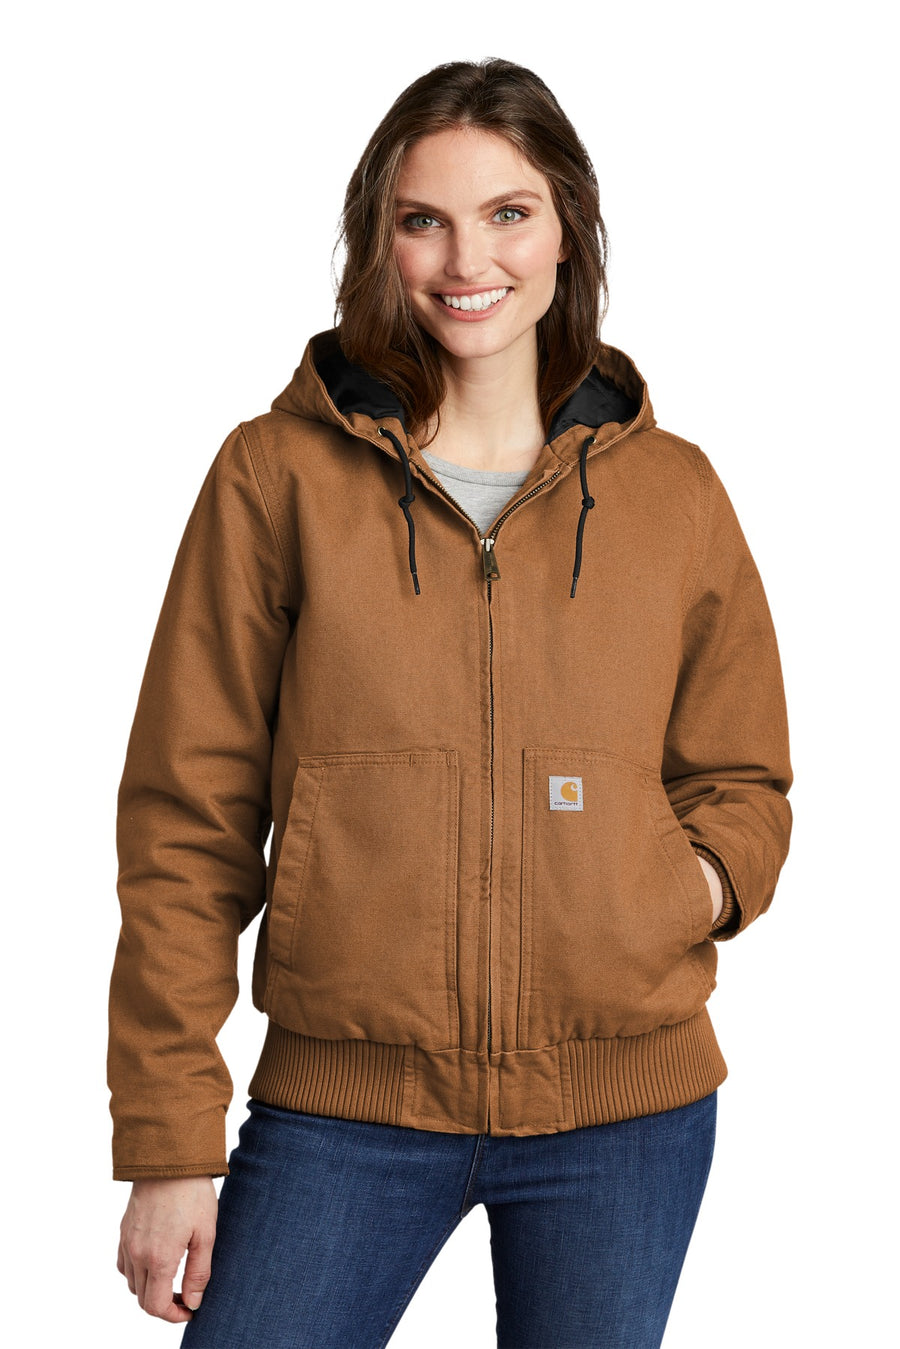 Carhartt Washed Duck Active Jac.